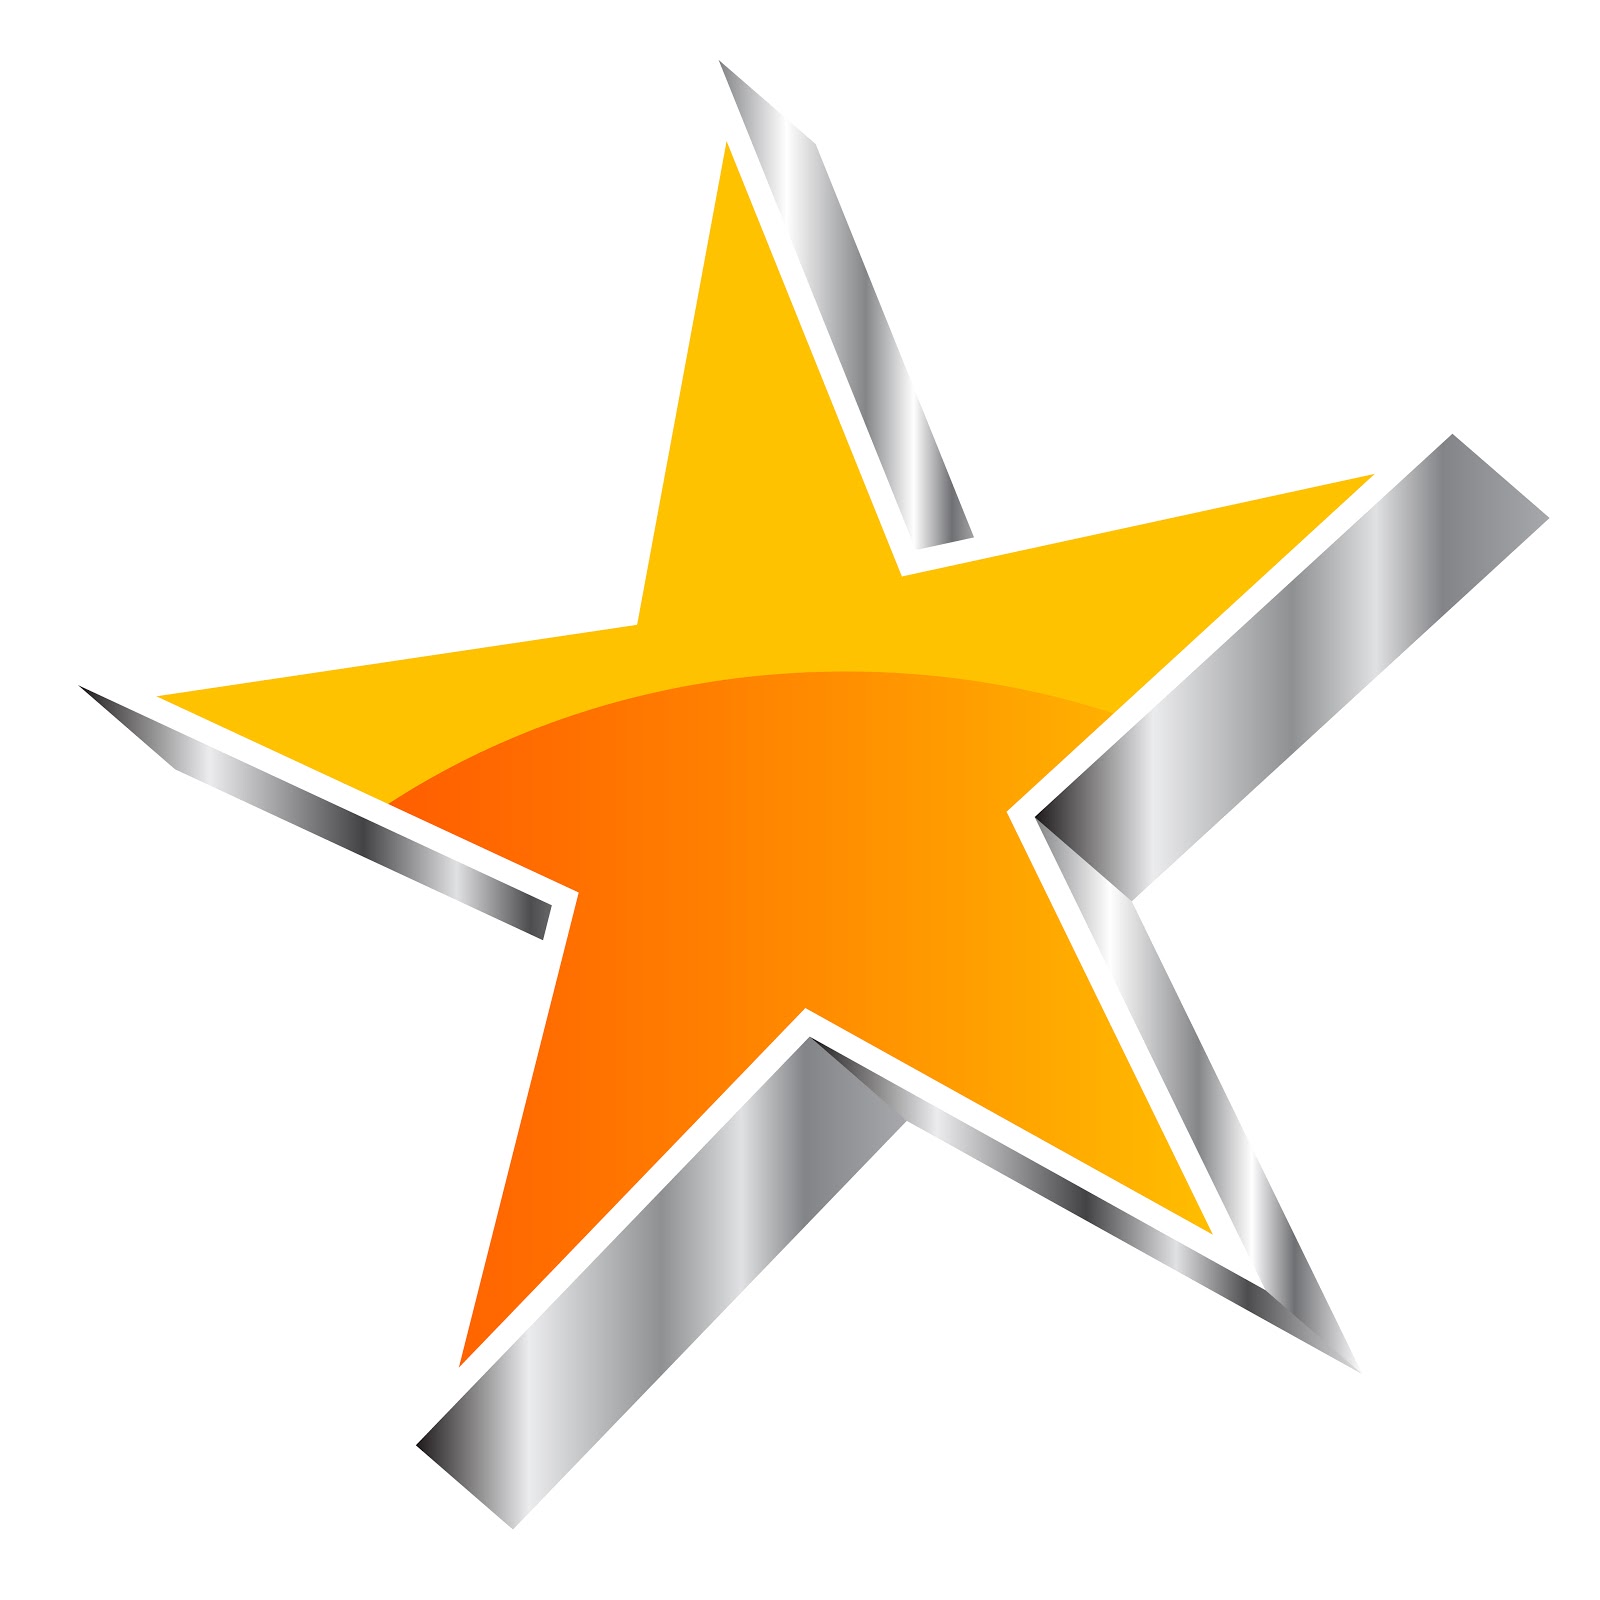 Orange Or Yellow Glossy Vector Star With Silver Elements